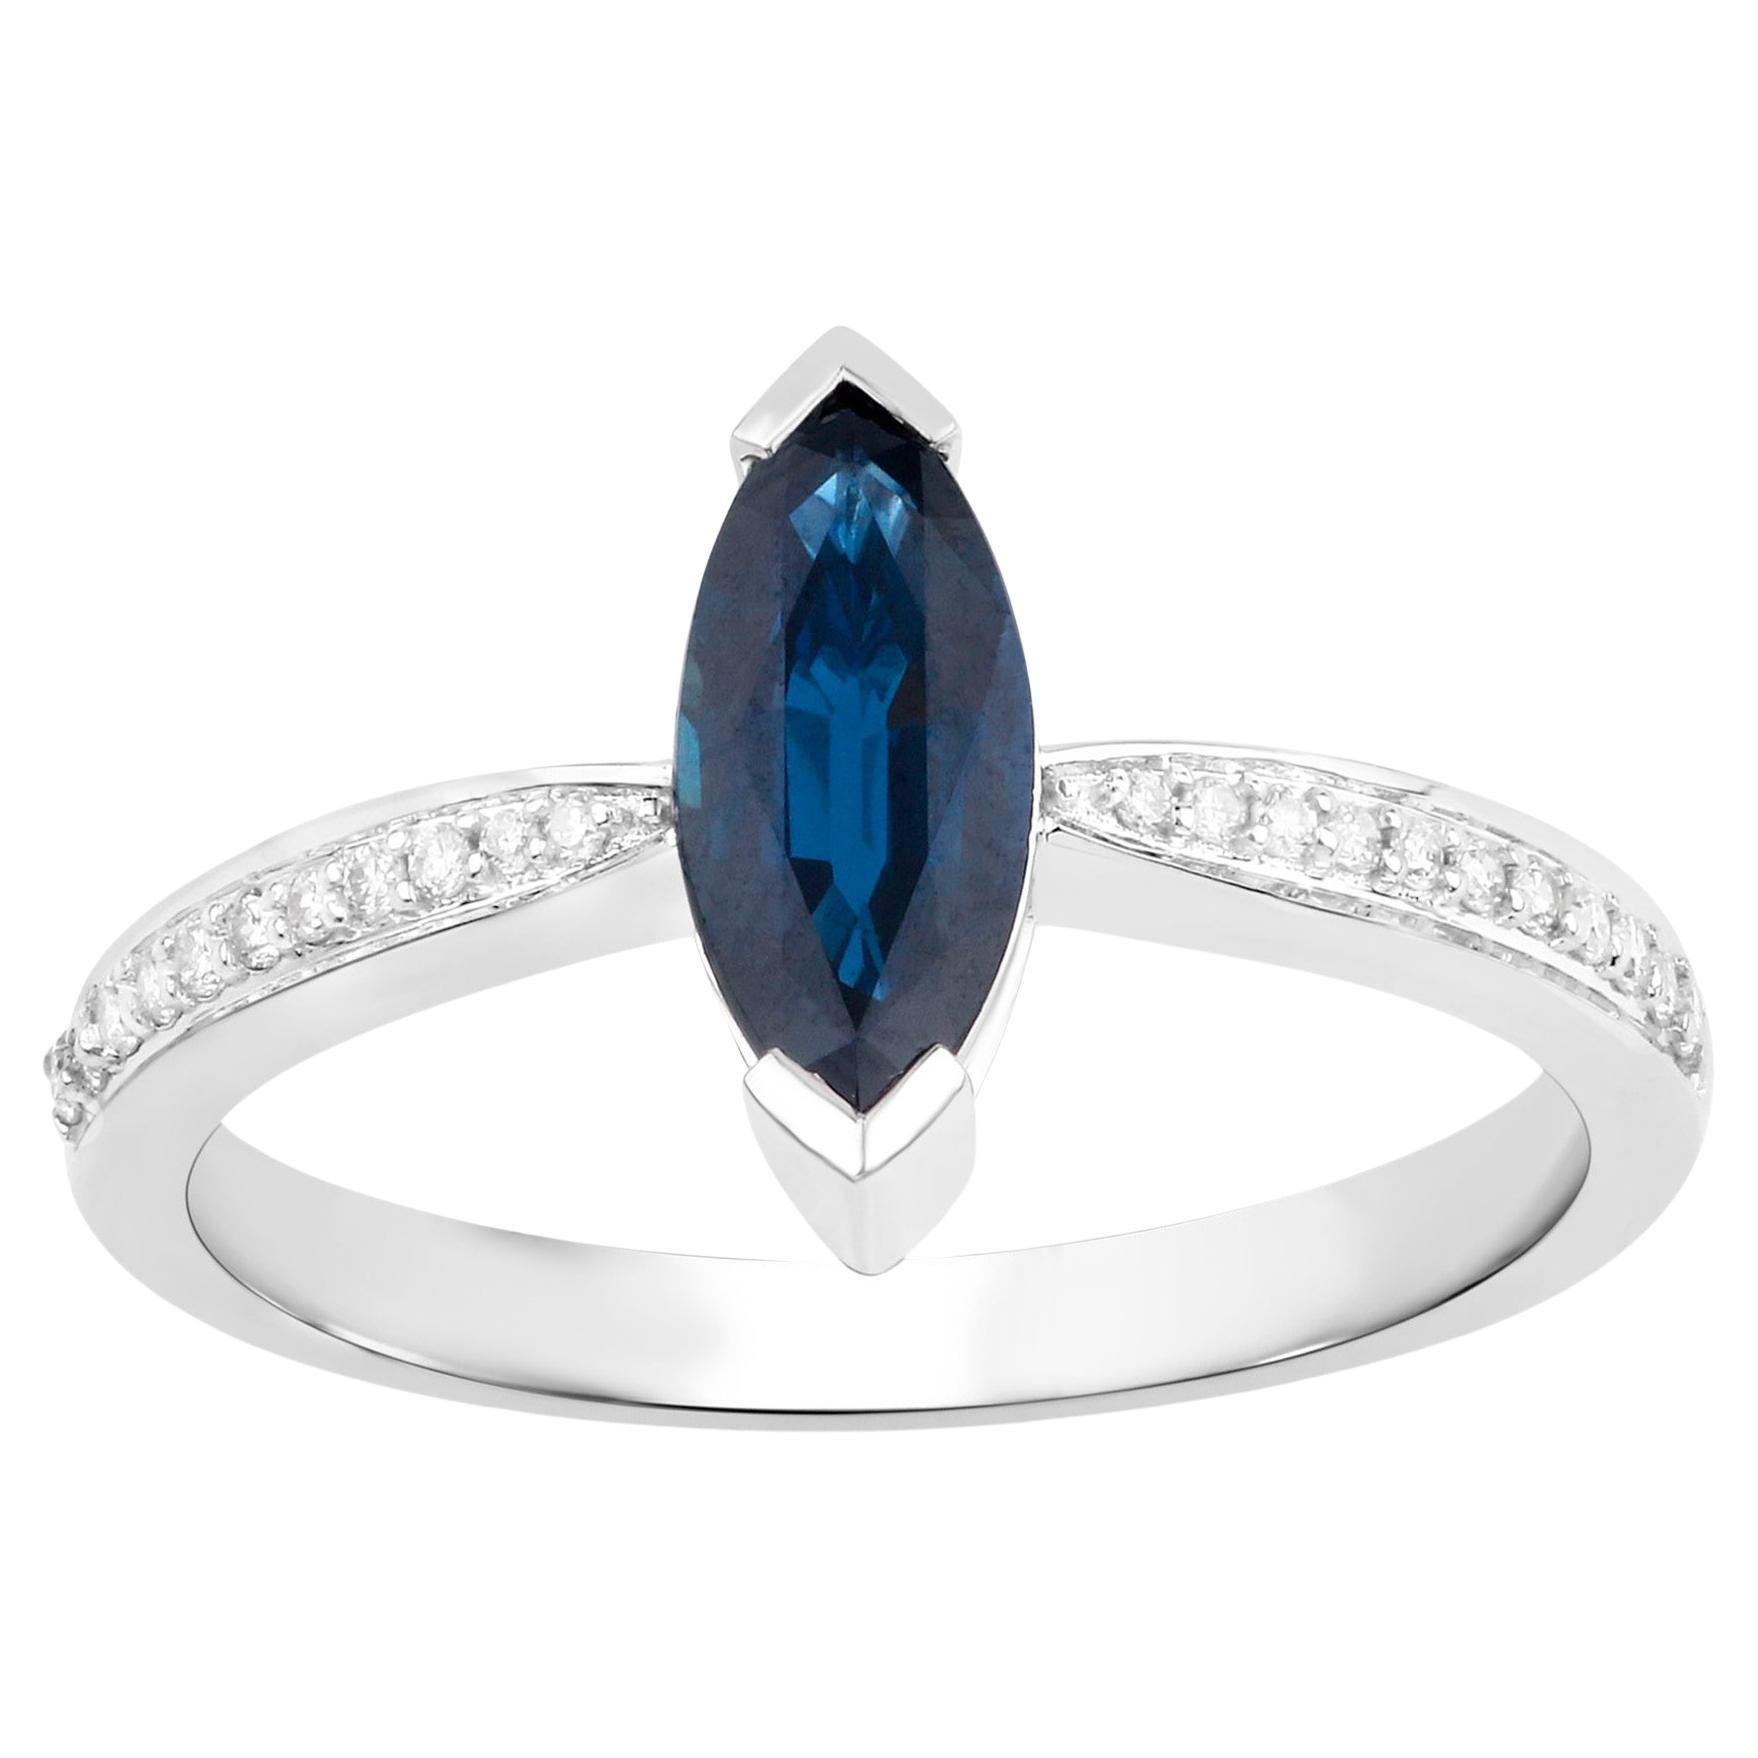 Marquise Blue Sapphire Ring With Diamonds 1.44 Carats 14K White Gold